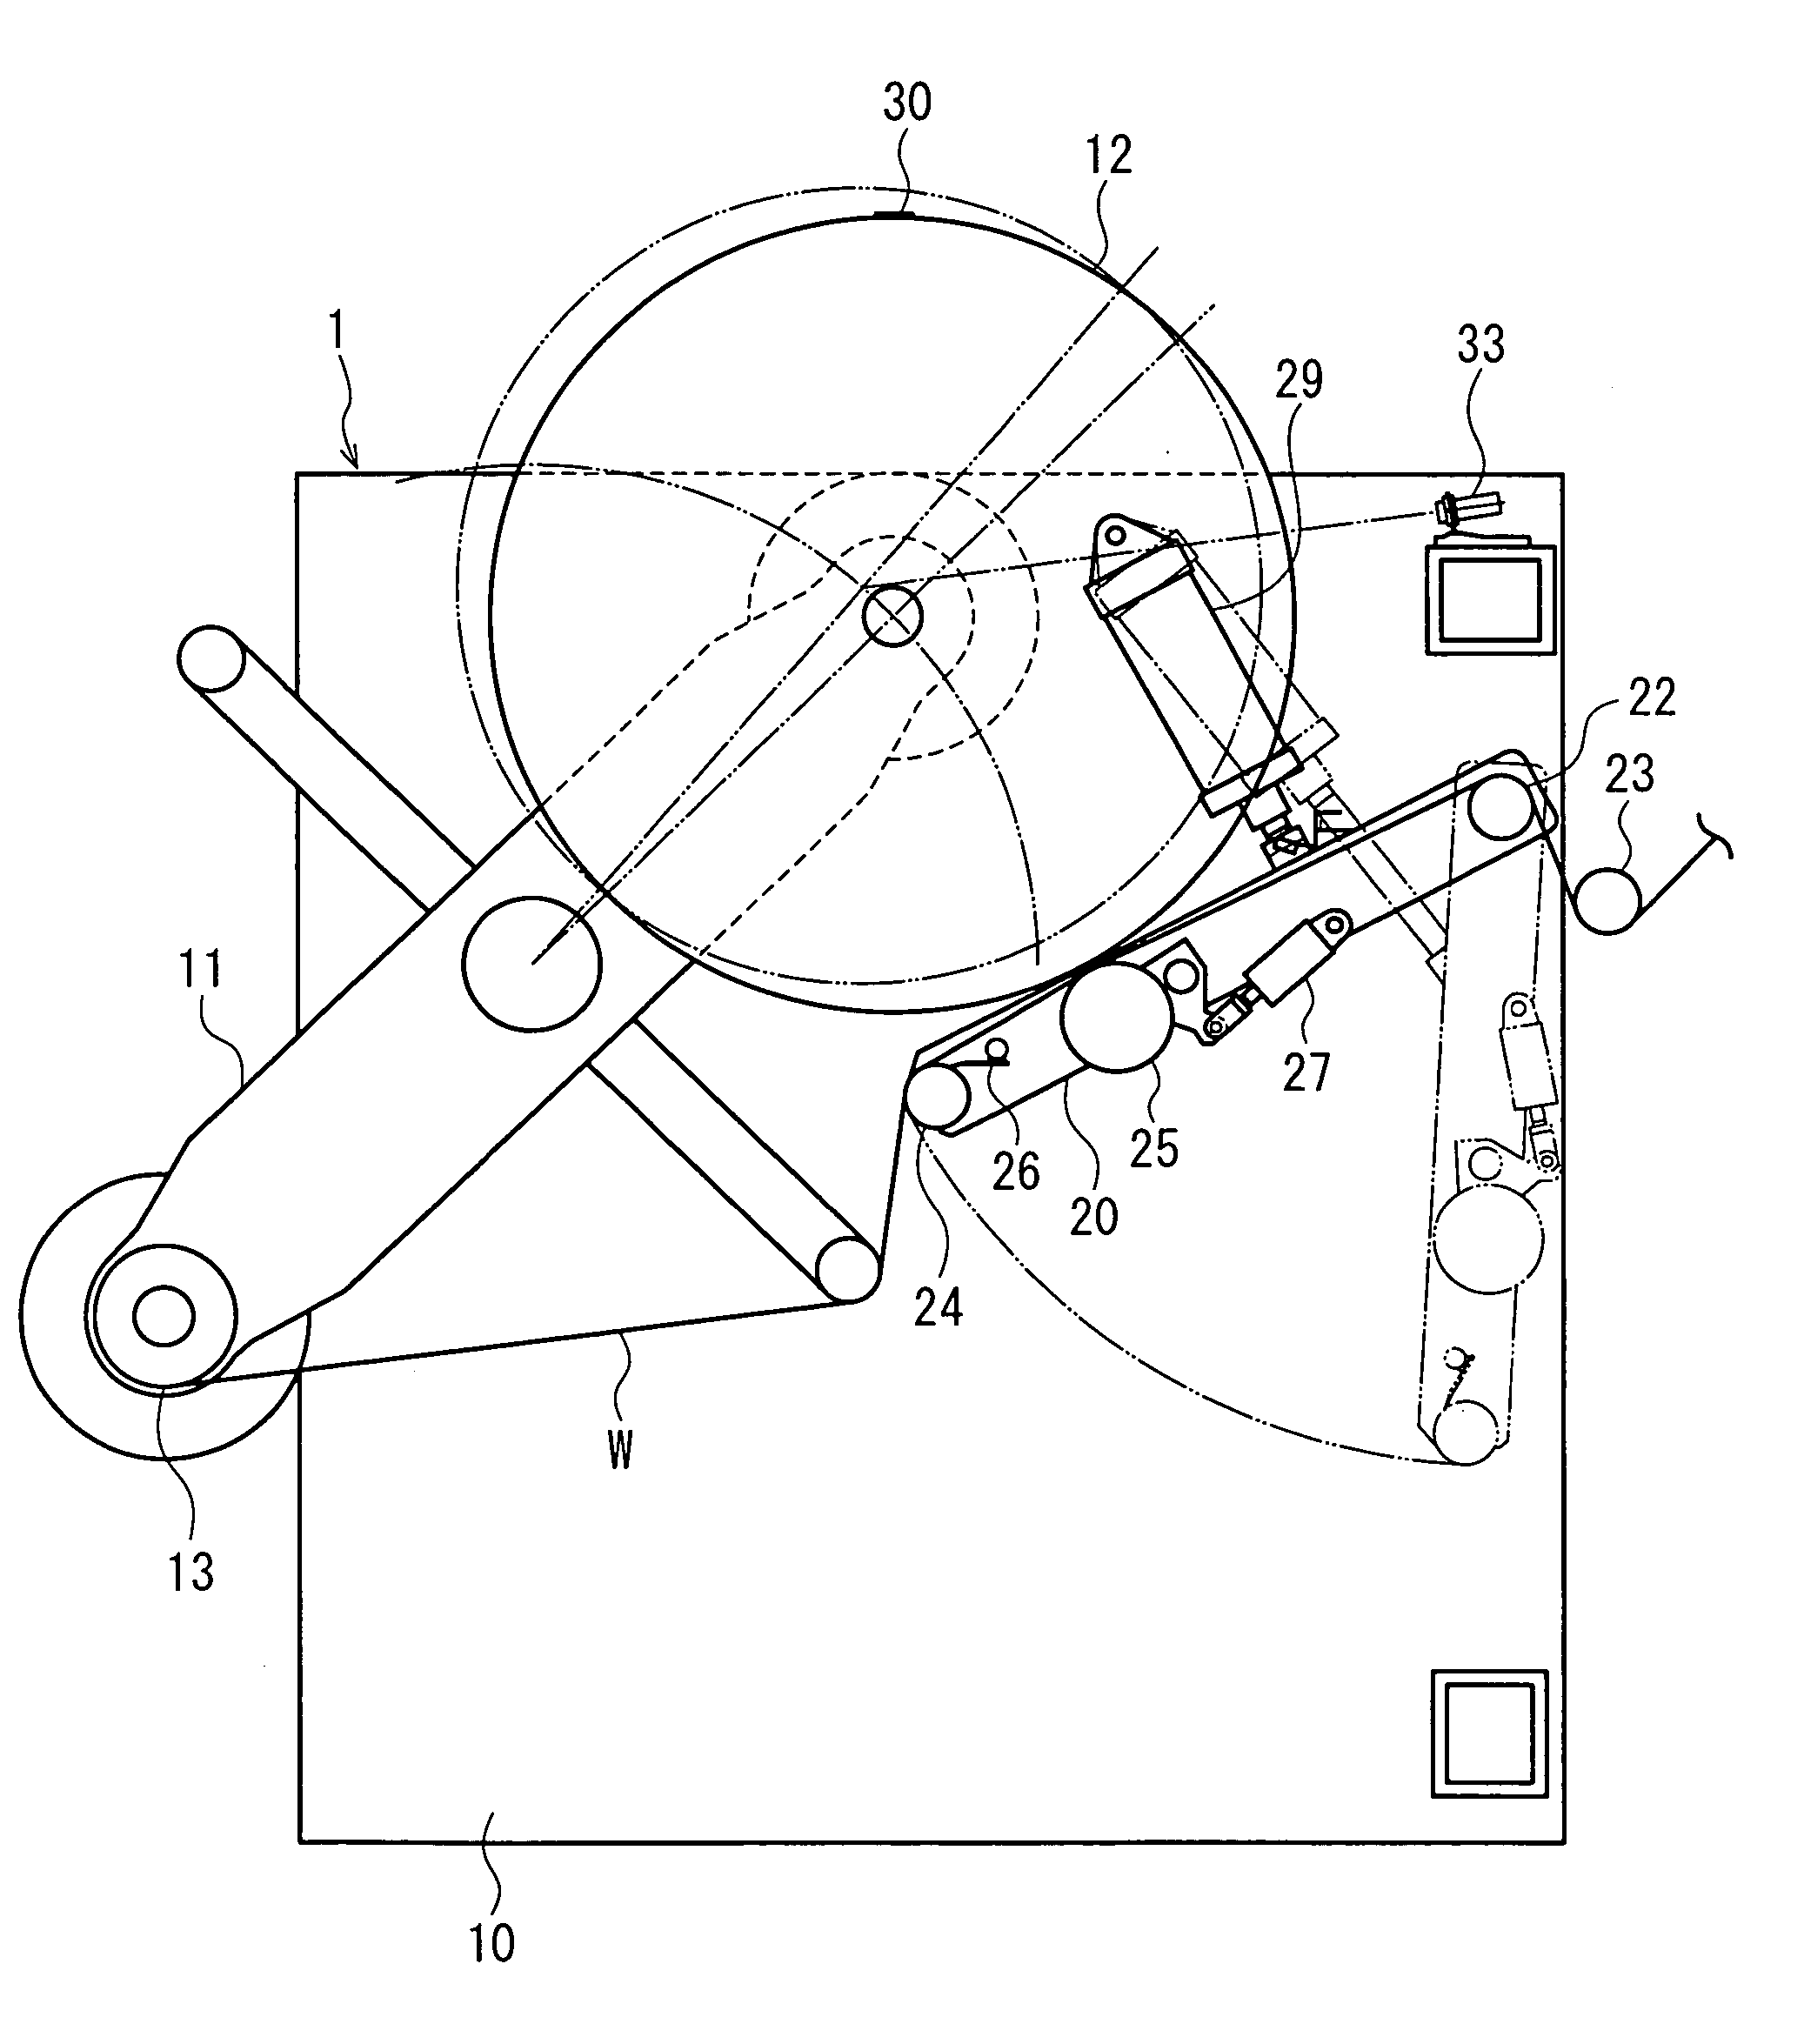 Strip continuous supply apparatus and method